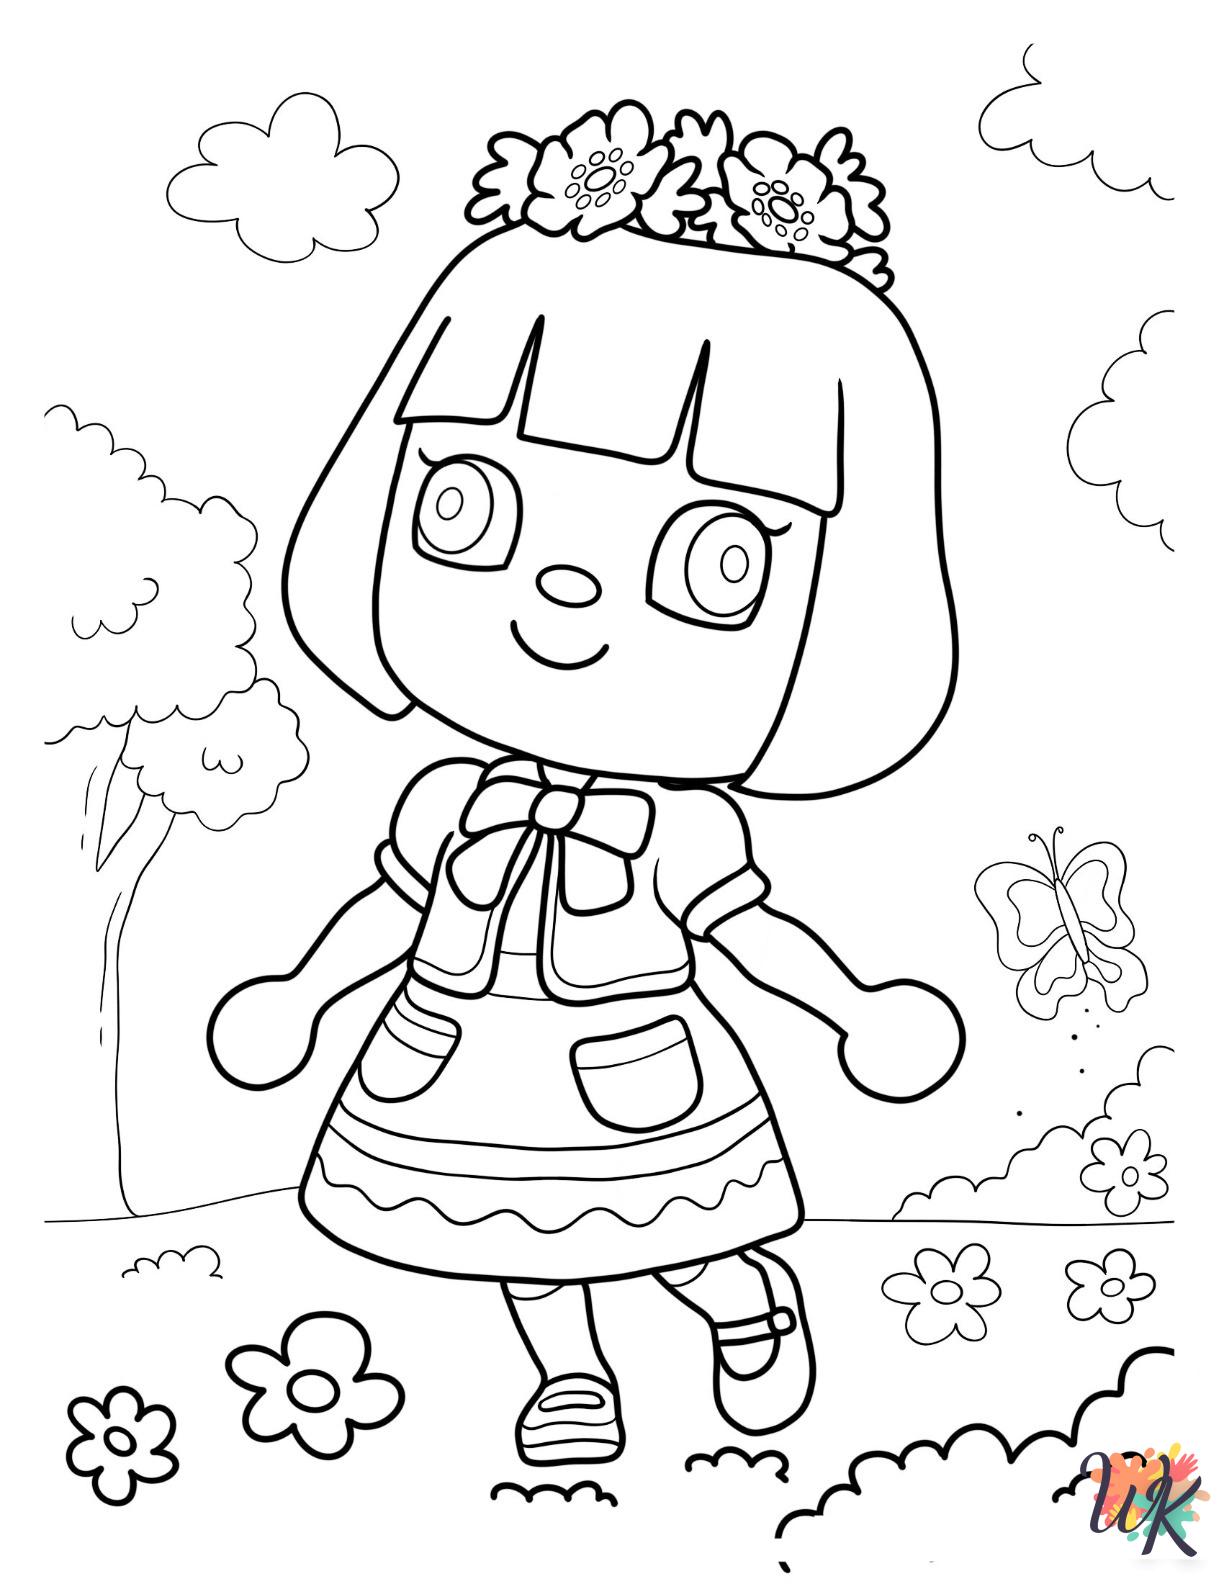 Animal Crossing ornaments coloring pages